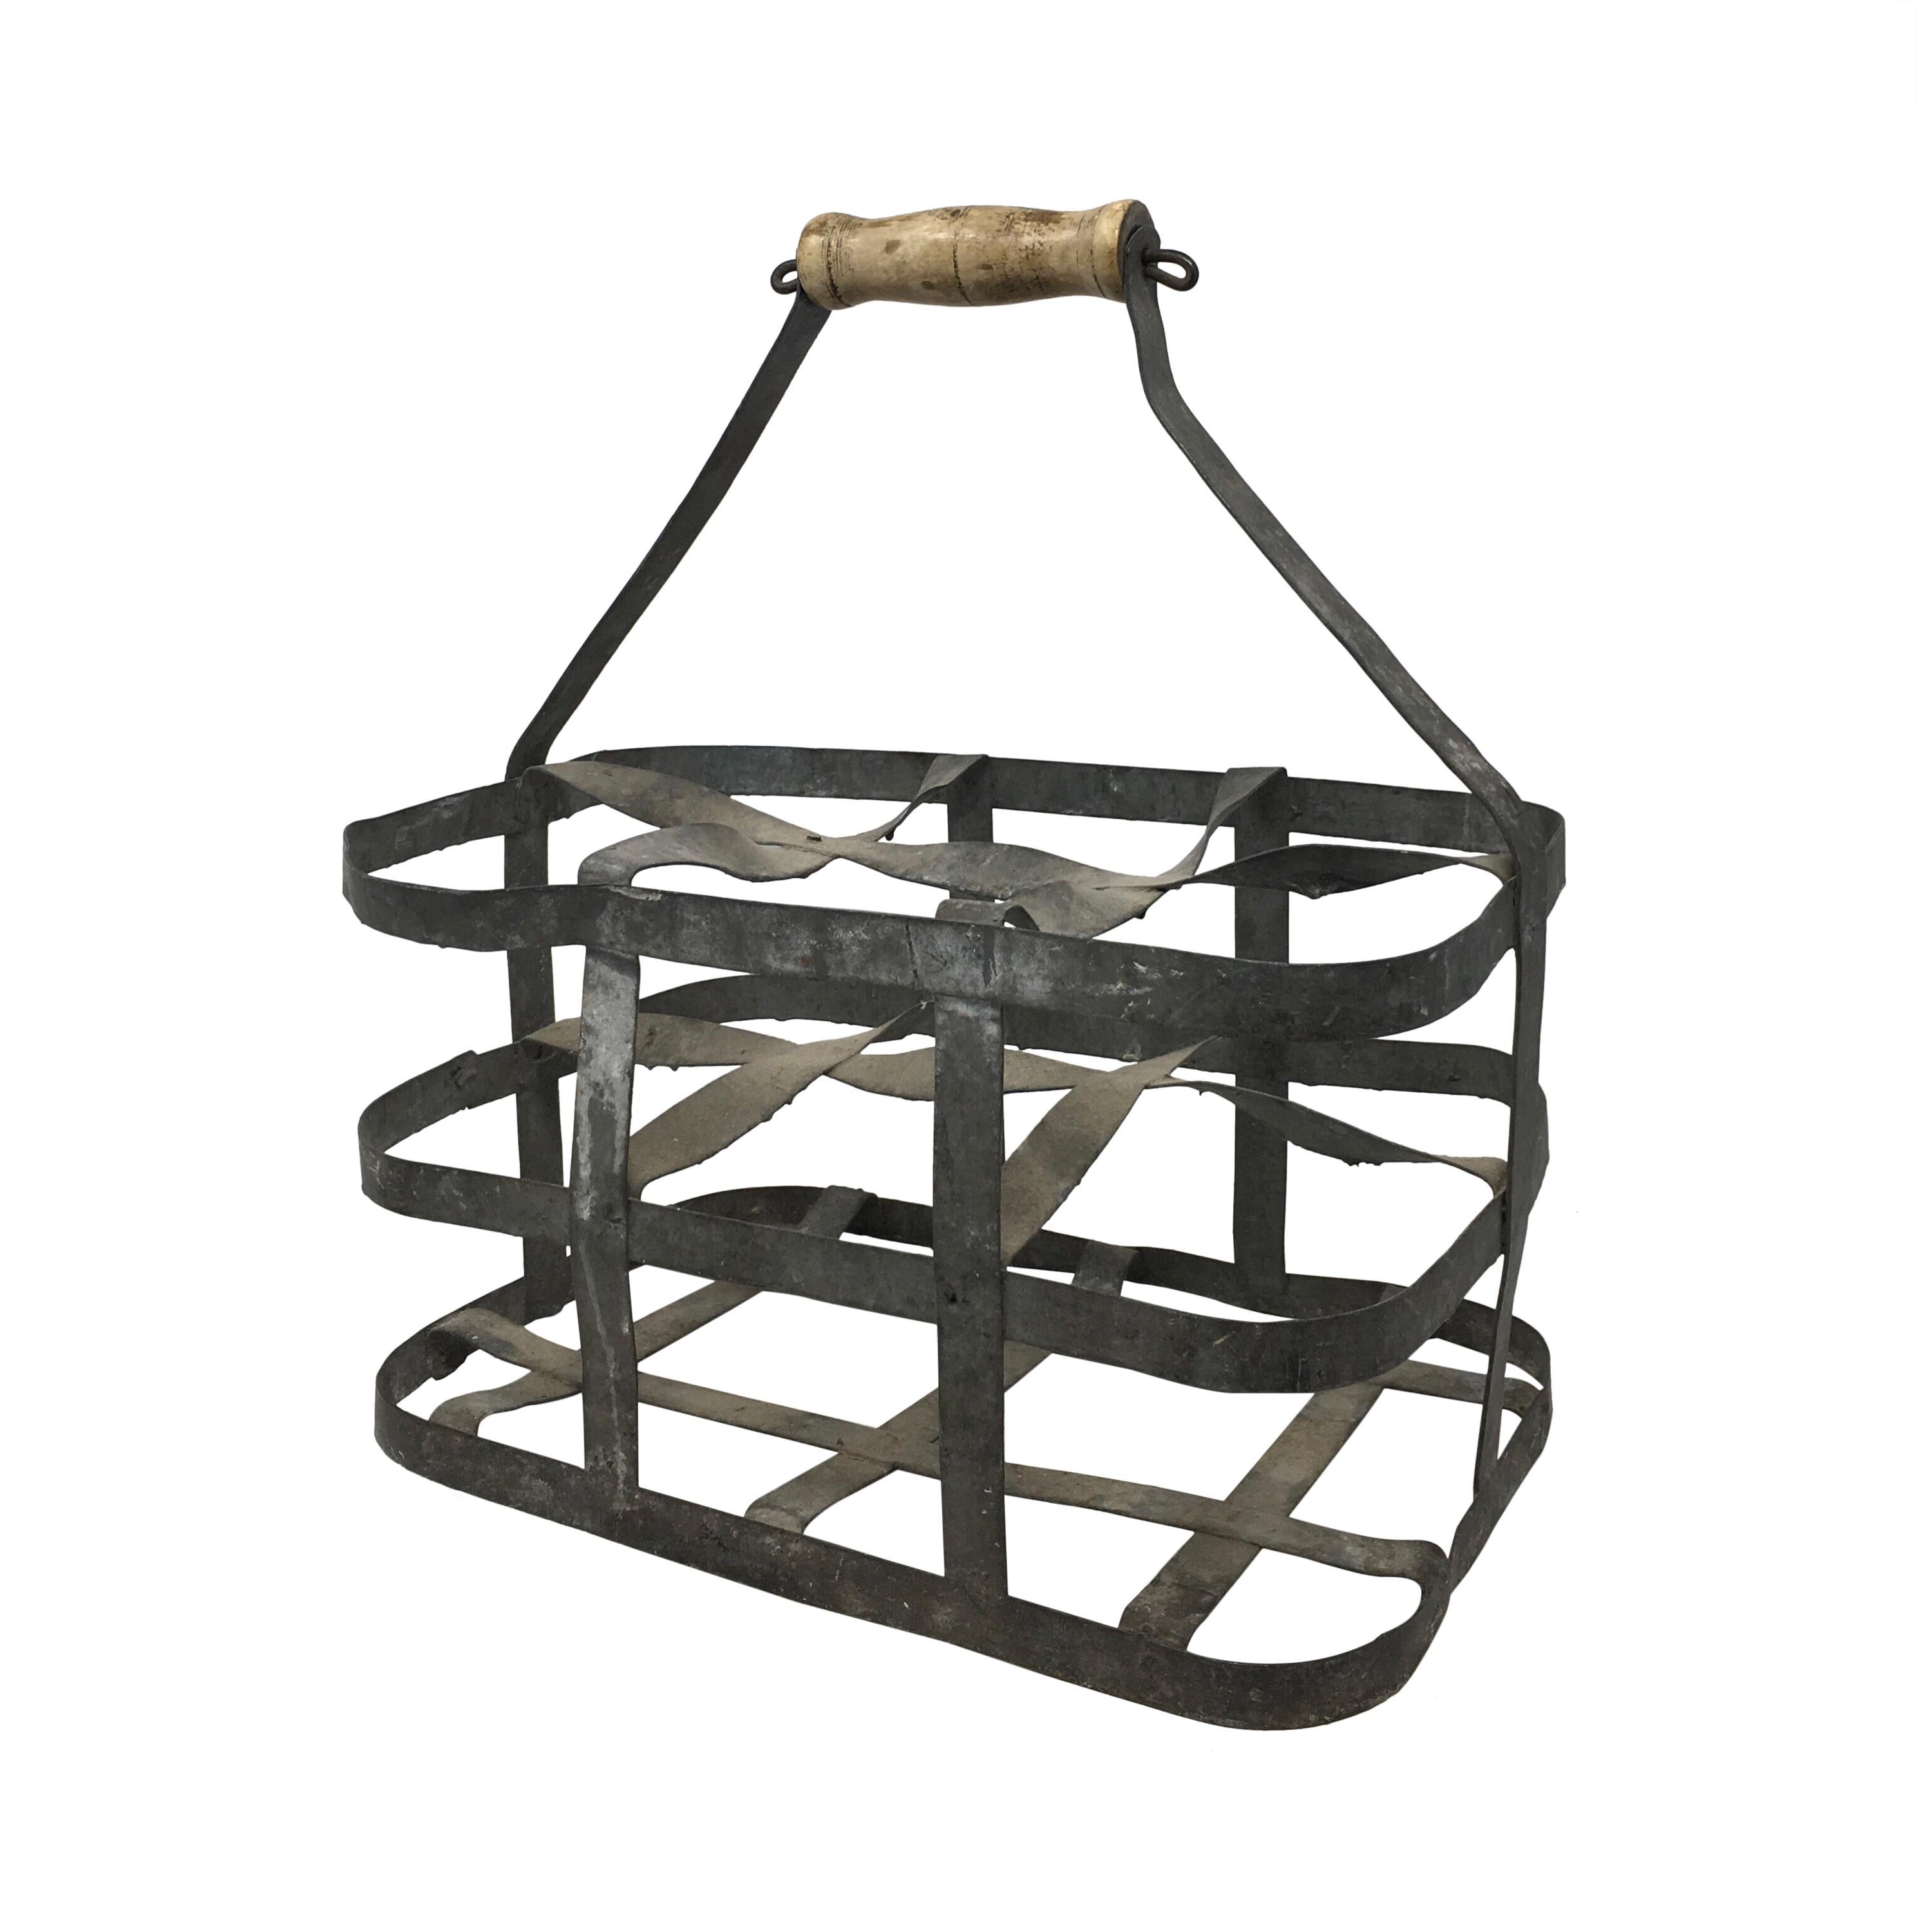 Early 20th Century French Six Bottle Wine Carrier Basket from France